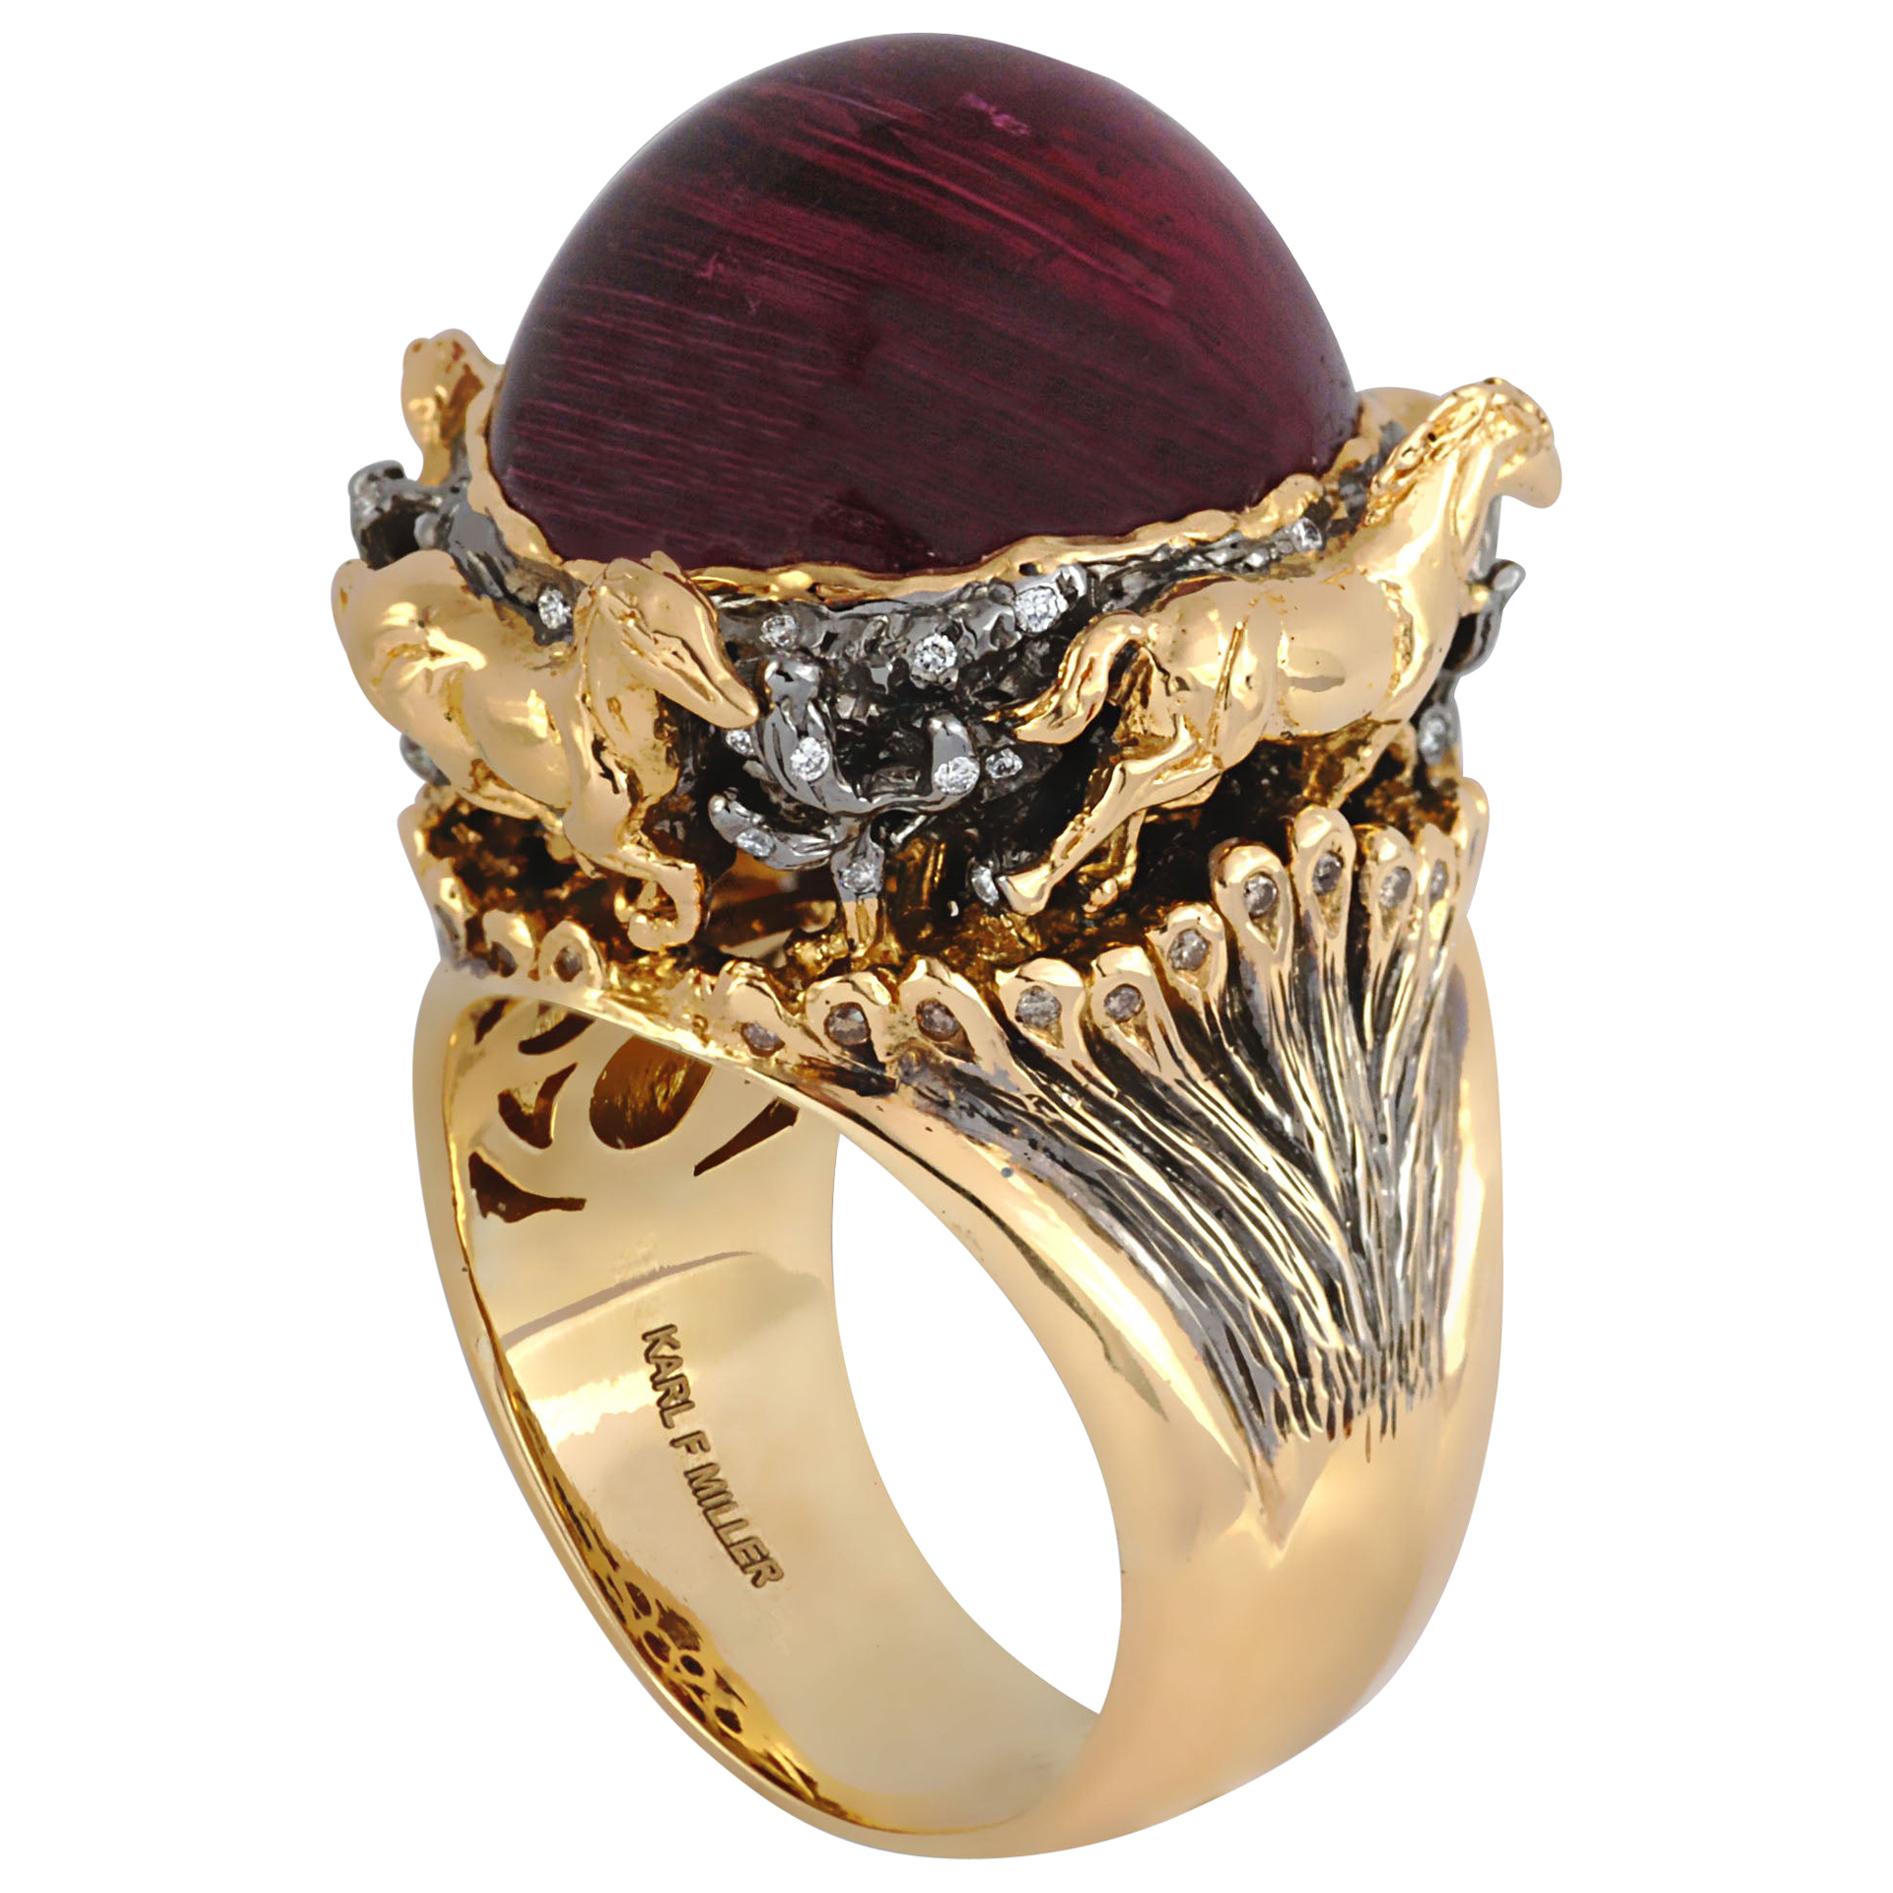 Certified Rubellite Cat's Eye, Brown Diamond with Diamond Horse Ring in 18K Gold